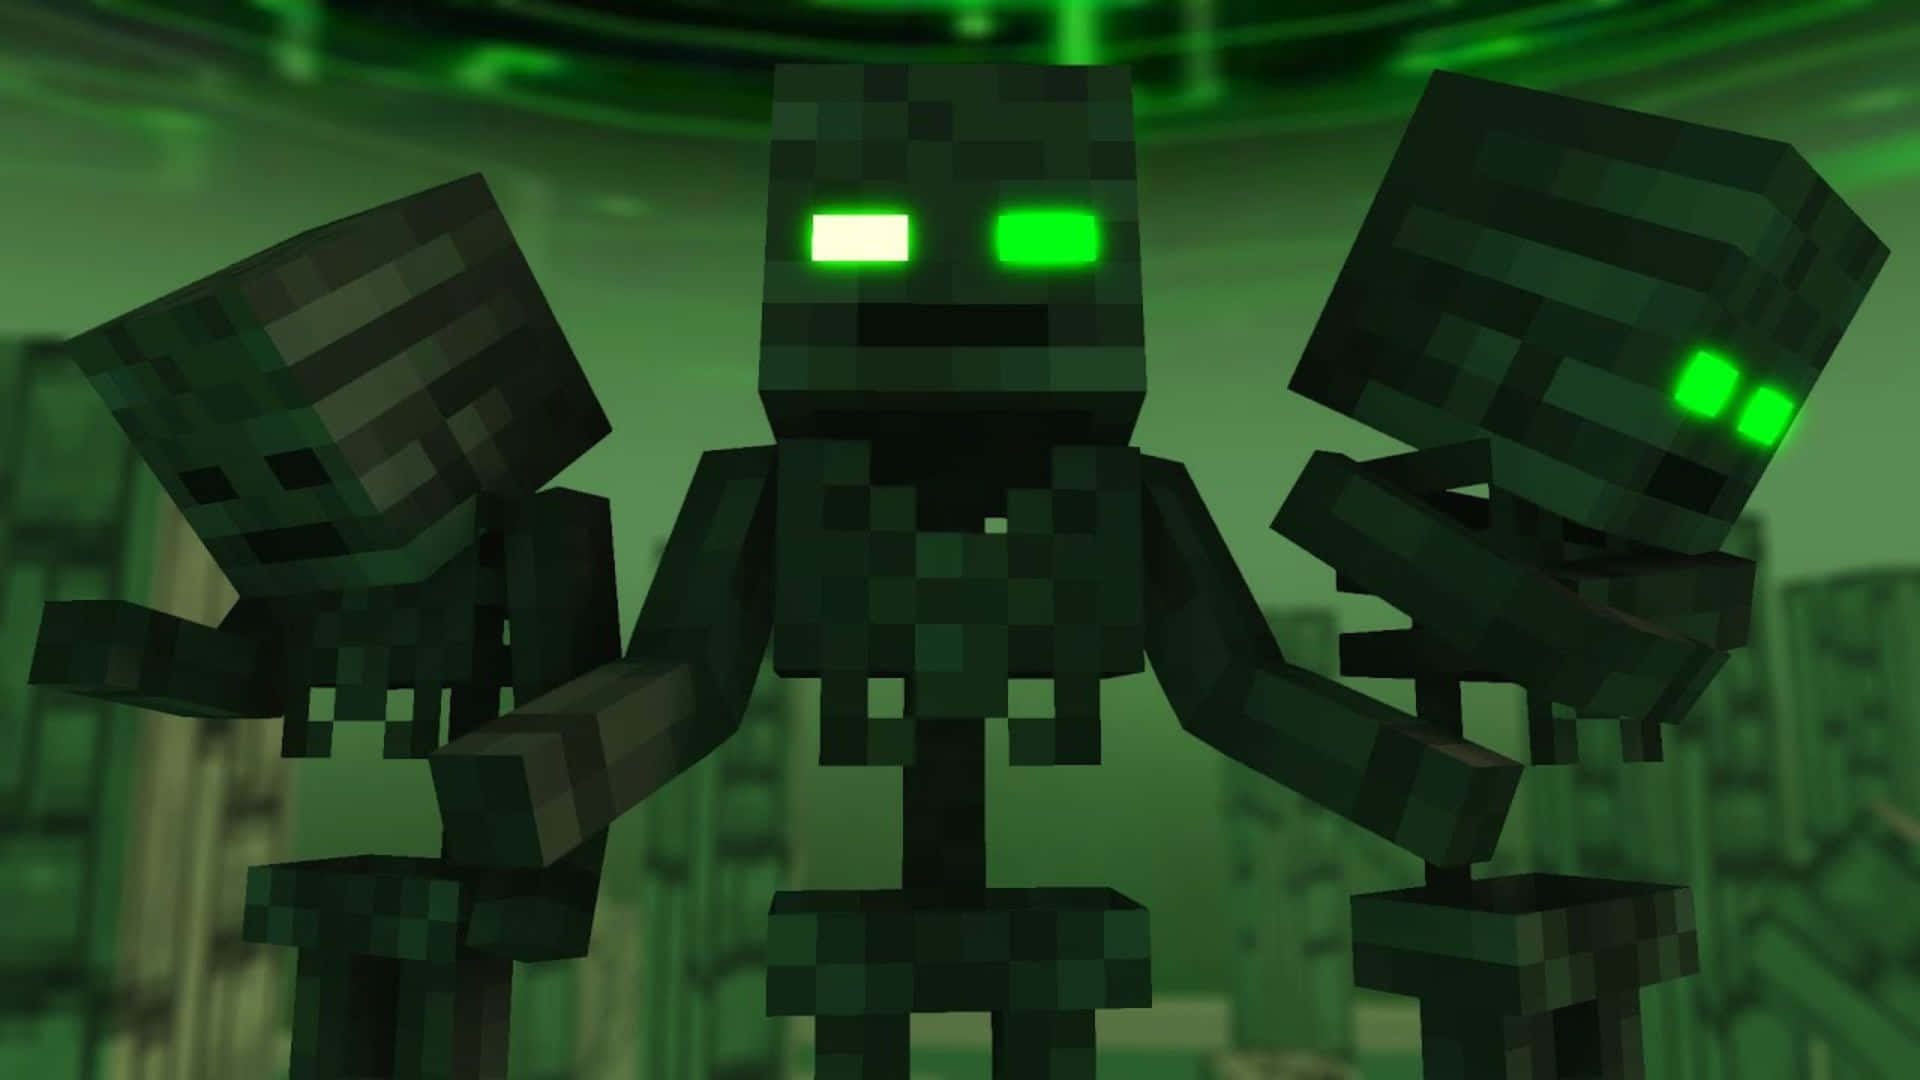 The Mighty Minecraft Wither Awaits Battle in a Dark and Mysterious World Wallpaper